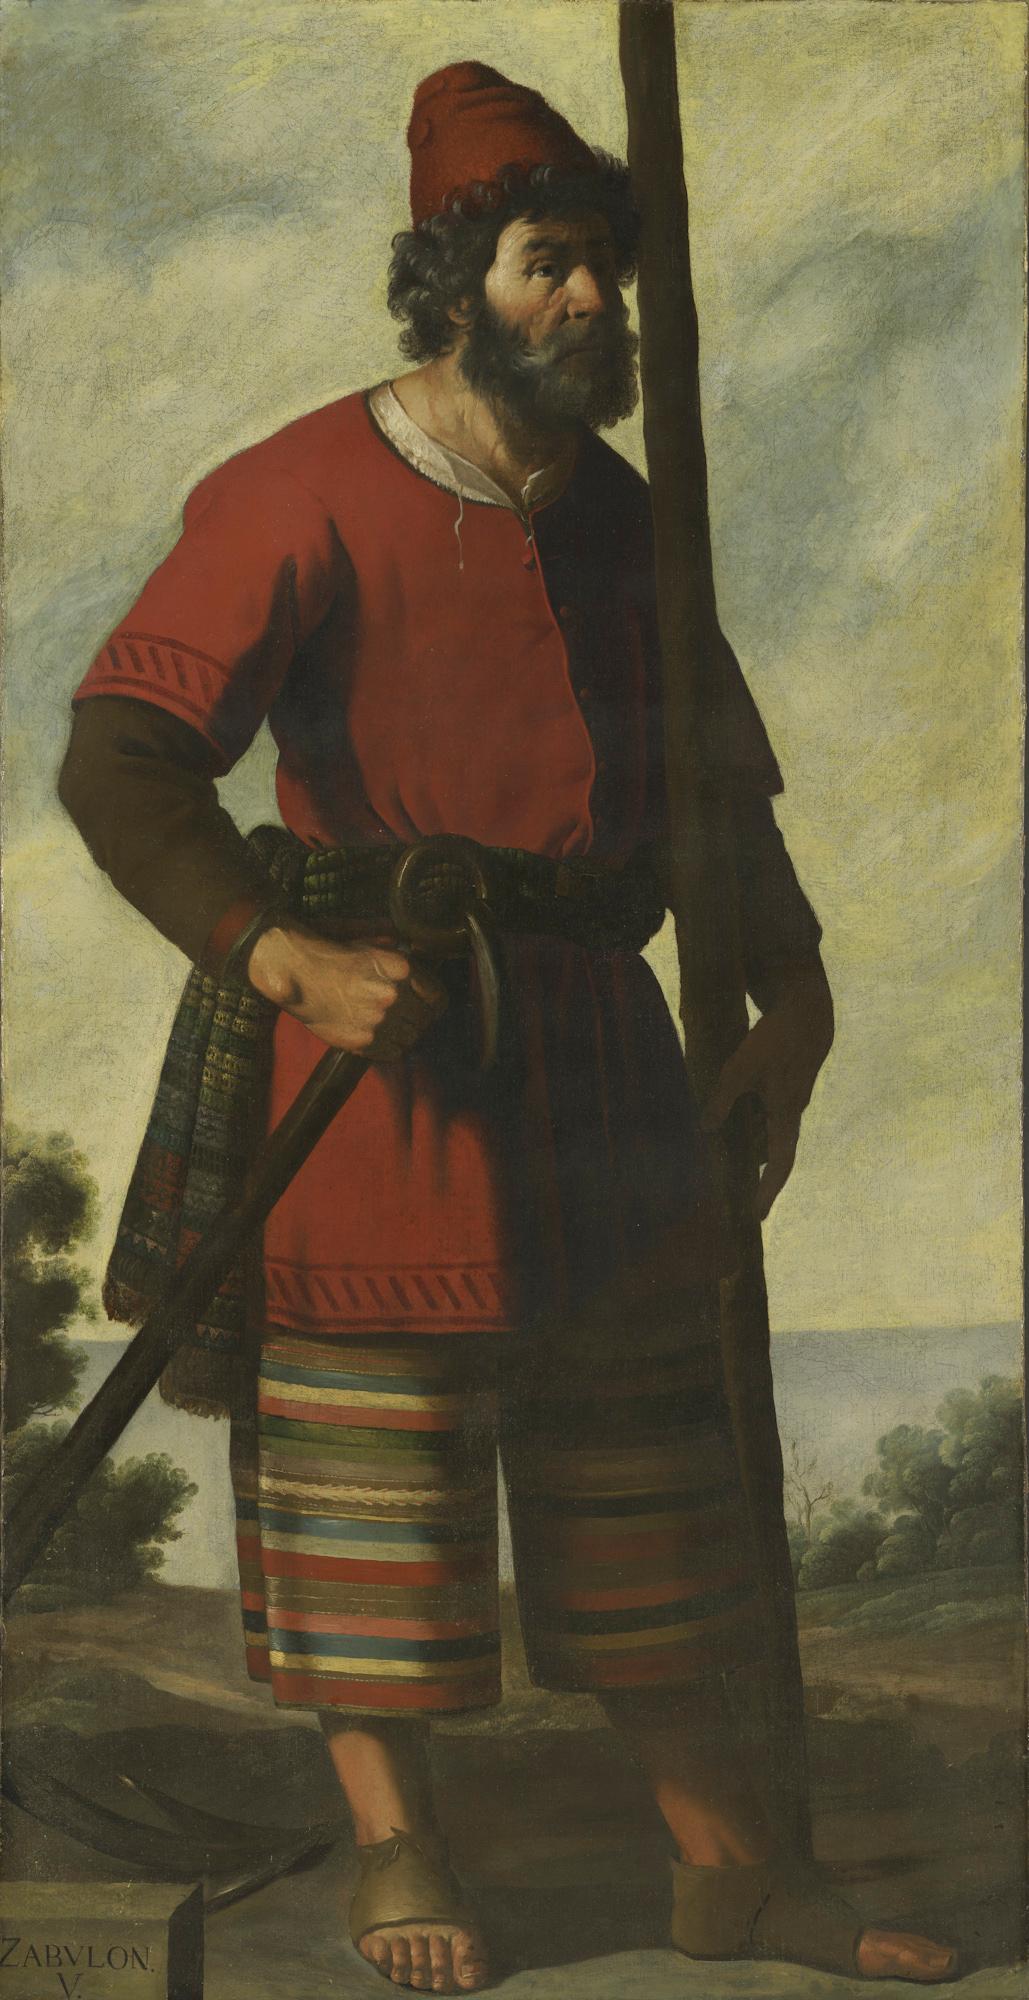 "Zebulun," circa 1640–1645, by Francisco de Zurbarán (1598–1664). Oil on canvas, 78 1/2 inches by 40 1/2 inches. The striped fabric of Zebulun's jaunty cropped pants has been connected with textiles from the Americas. (The Auckland Project/Zurbarán Trust/Robert LaPrelle)